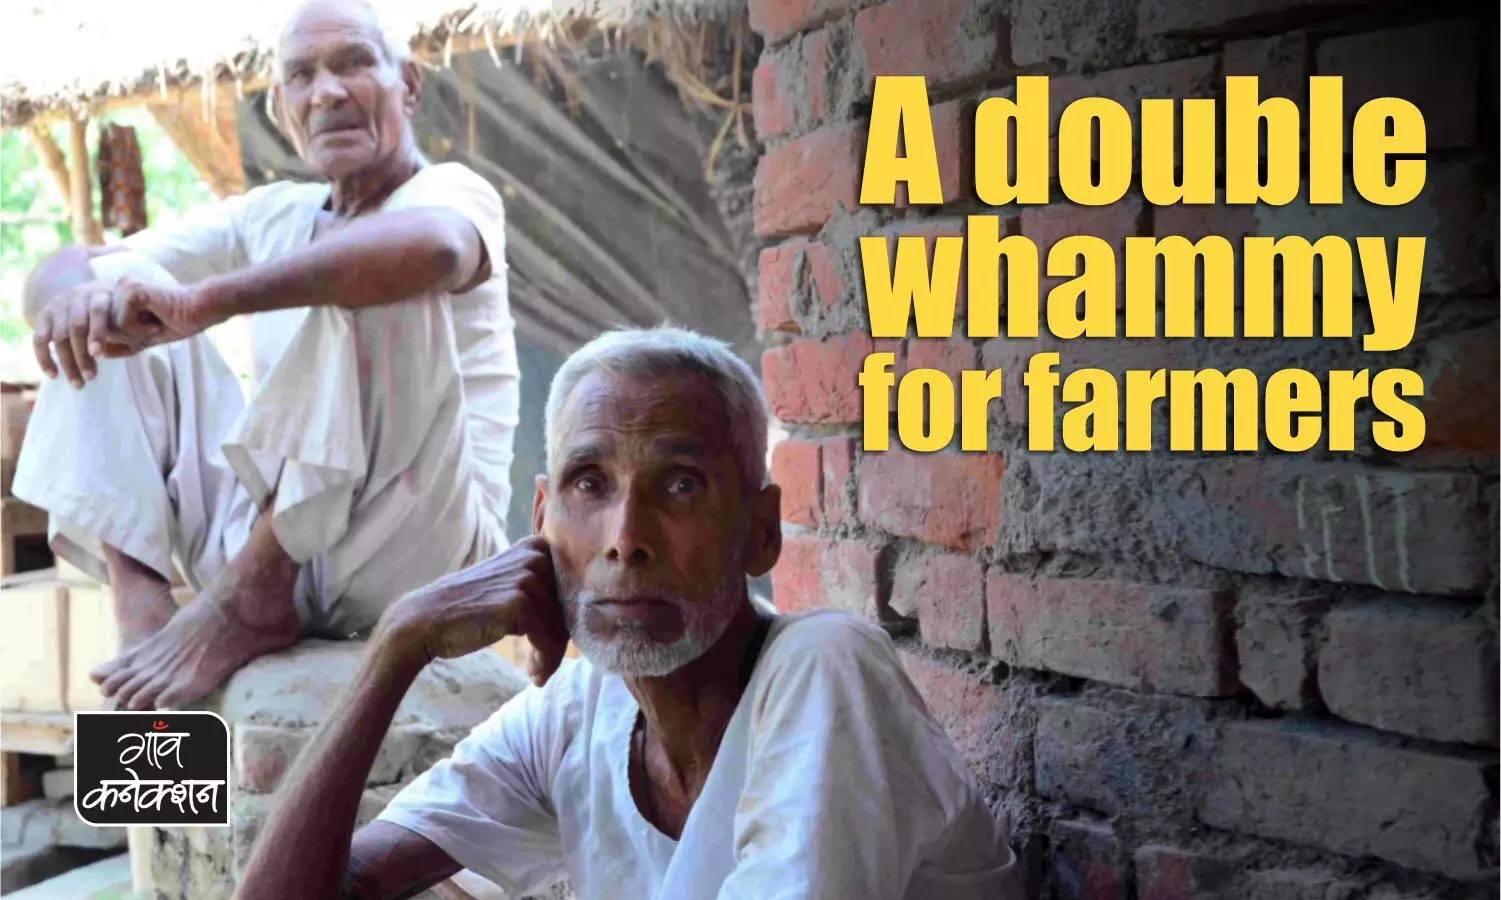 They lost their entire produce. Now, insurance companies are giving farmers grief